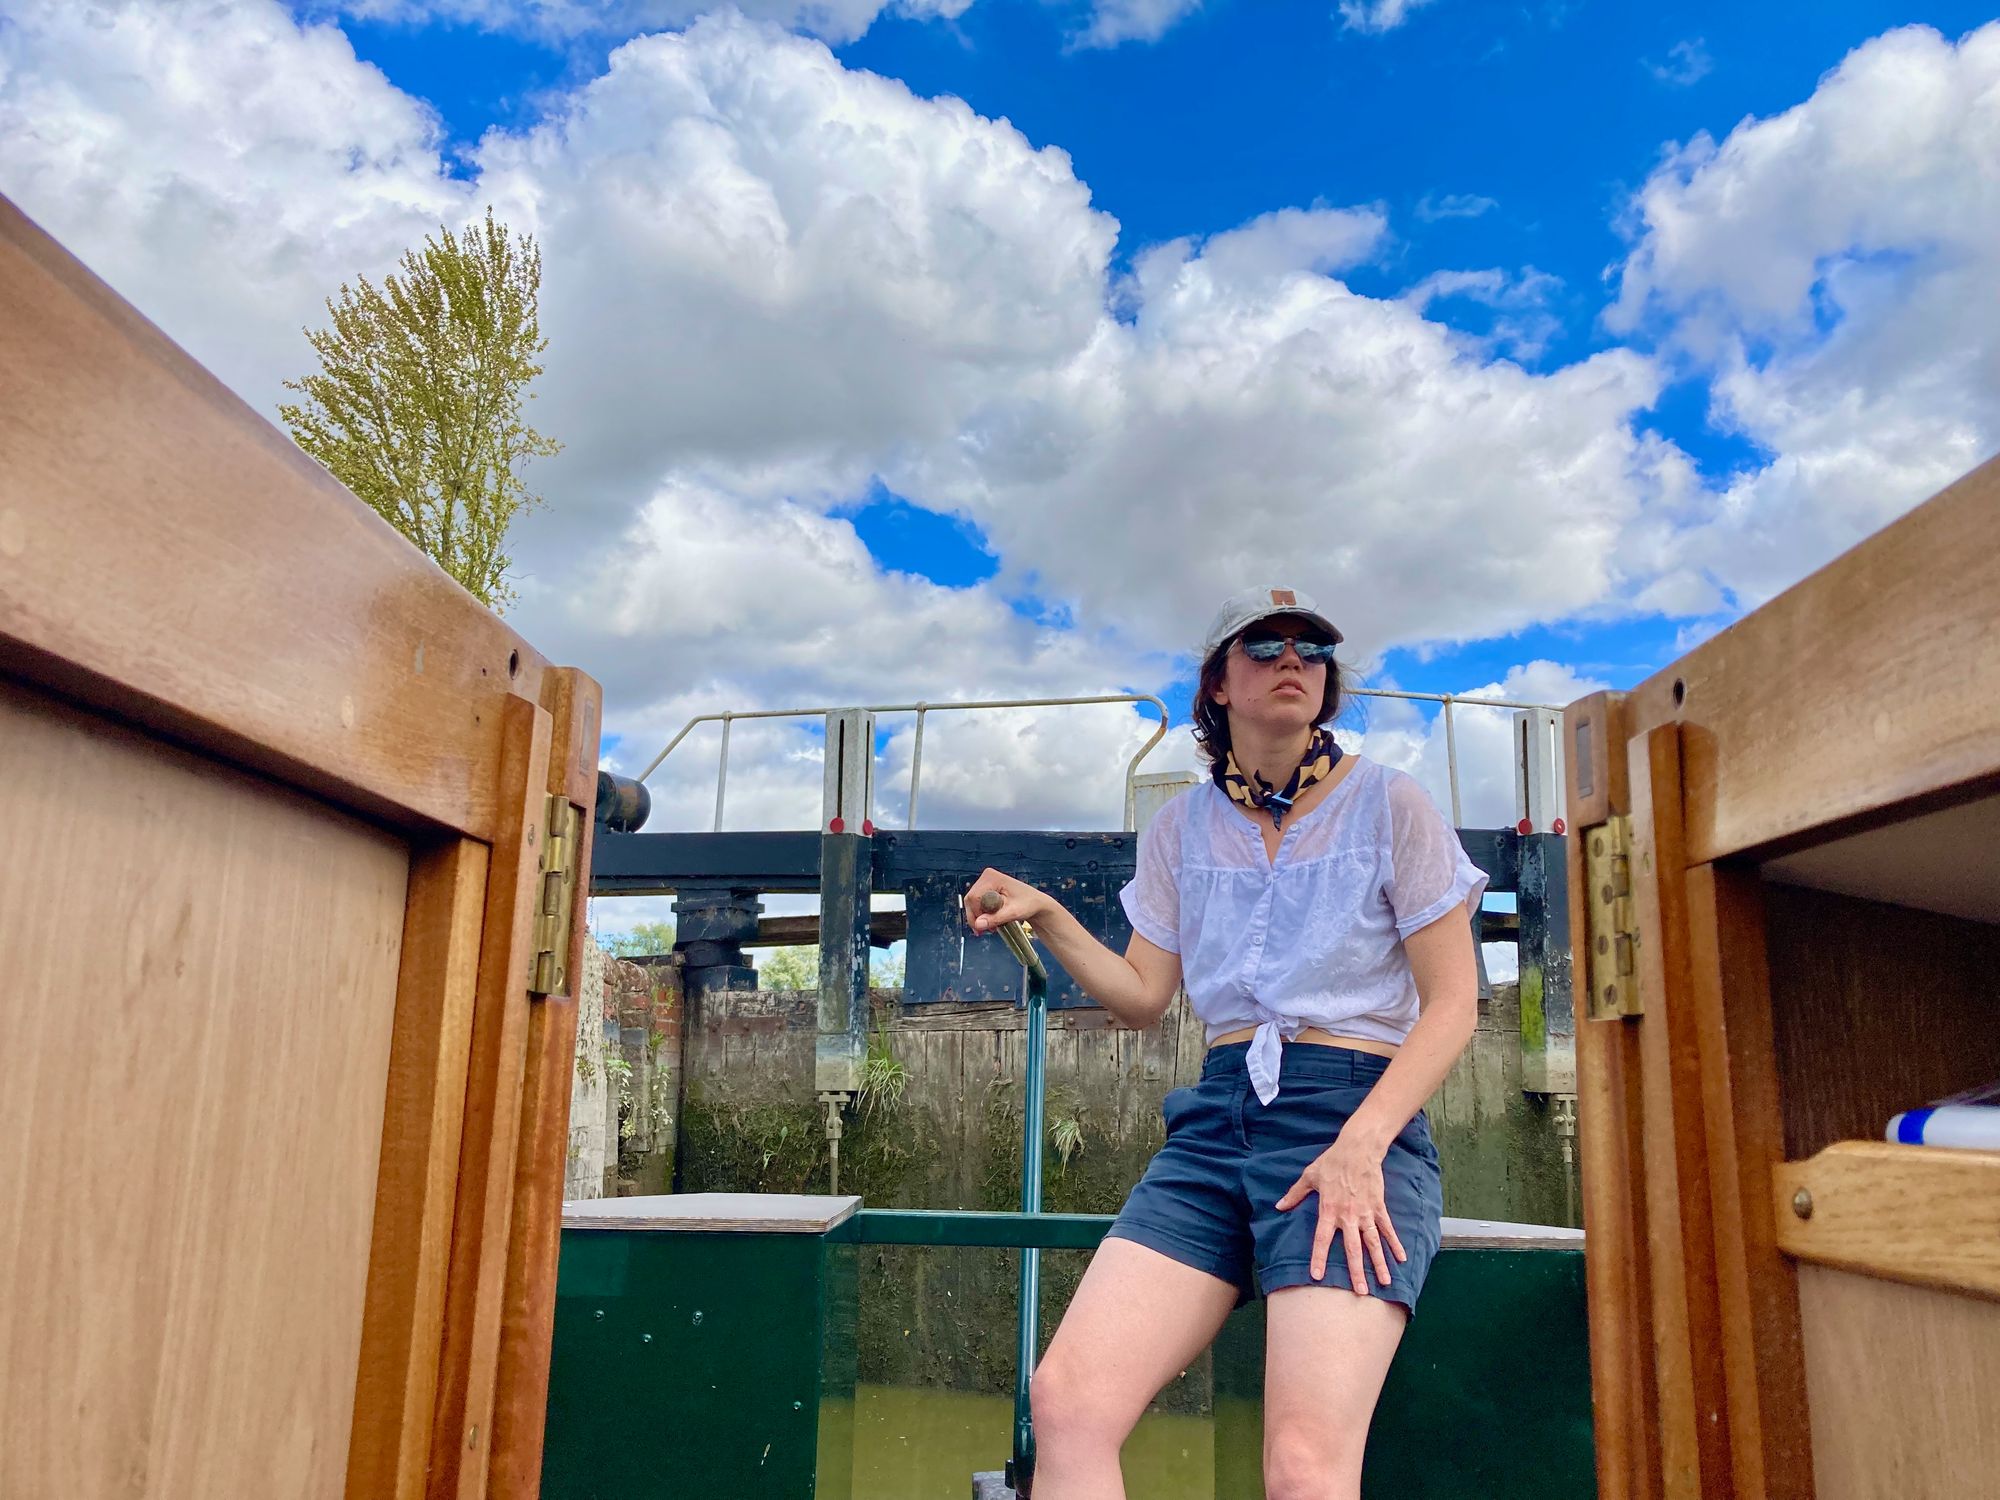 Cassandra sitting on back of canal boat with R hand on tiller, she sits looking out as she pilots, closed locks with algae and plants growing on them are right behind her, photographer has taken shot within cabin so Cassandra is framed by wooden cabin entrance and bright blue skies with puffy clouds.